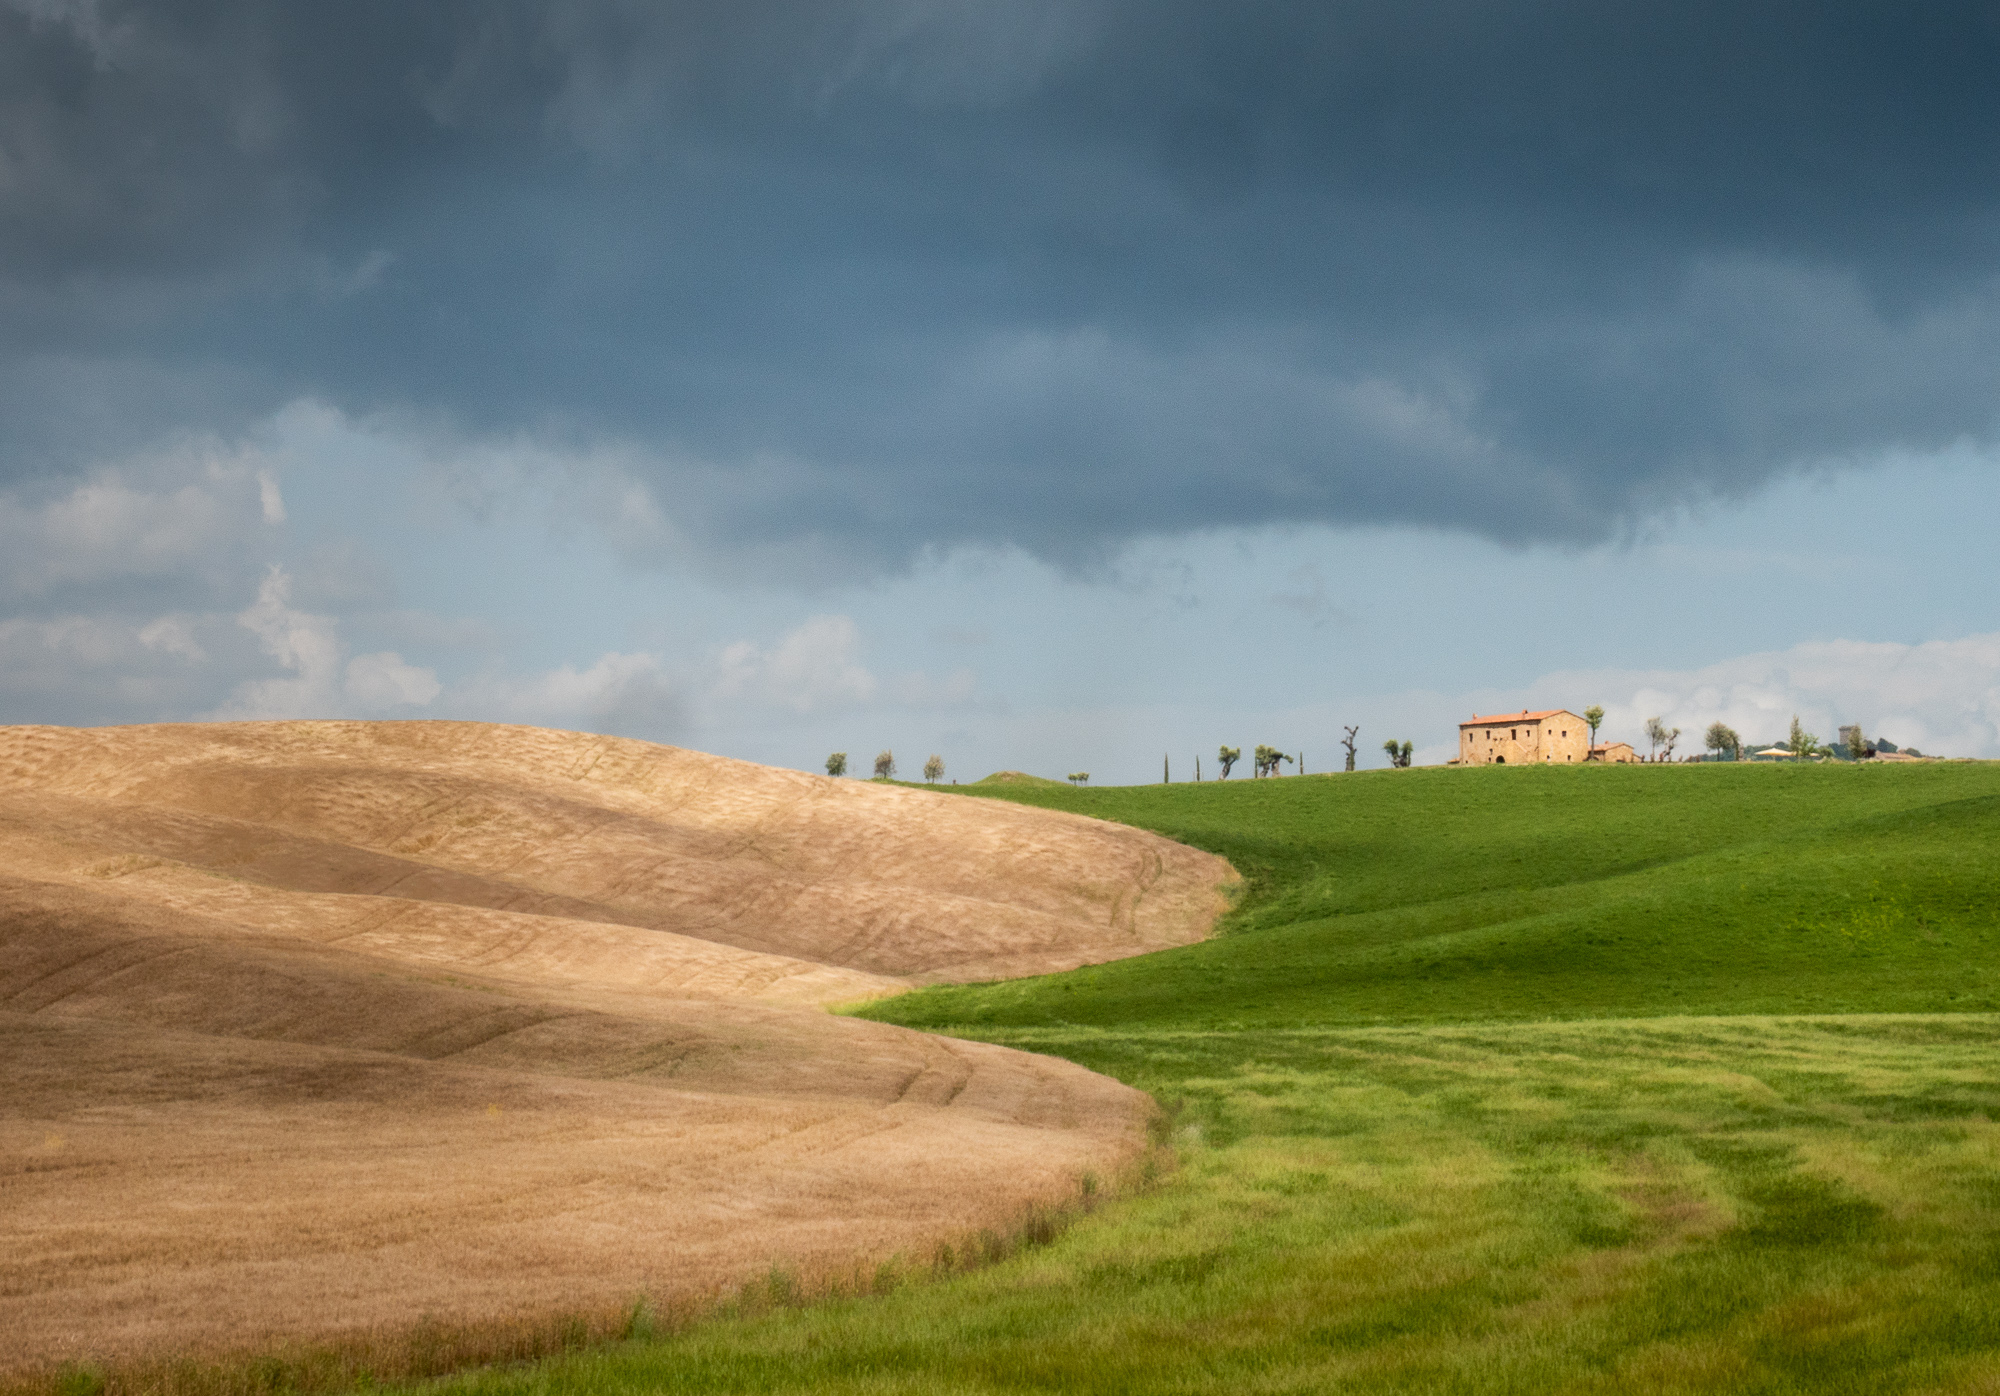 The Val d'Orcia